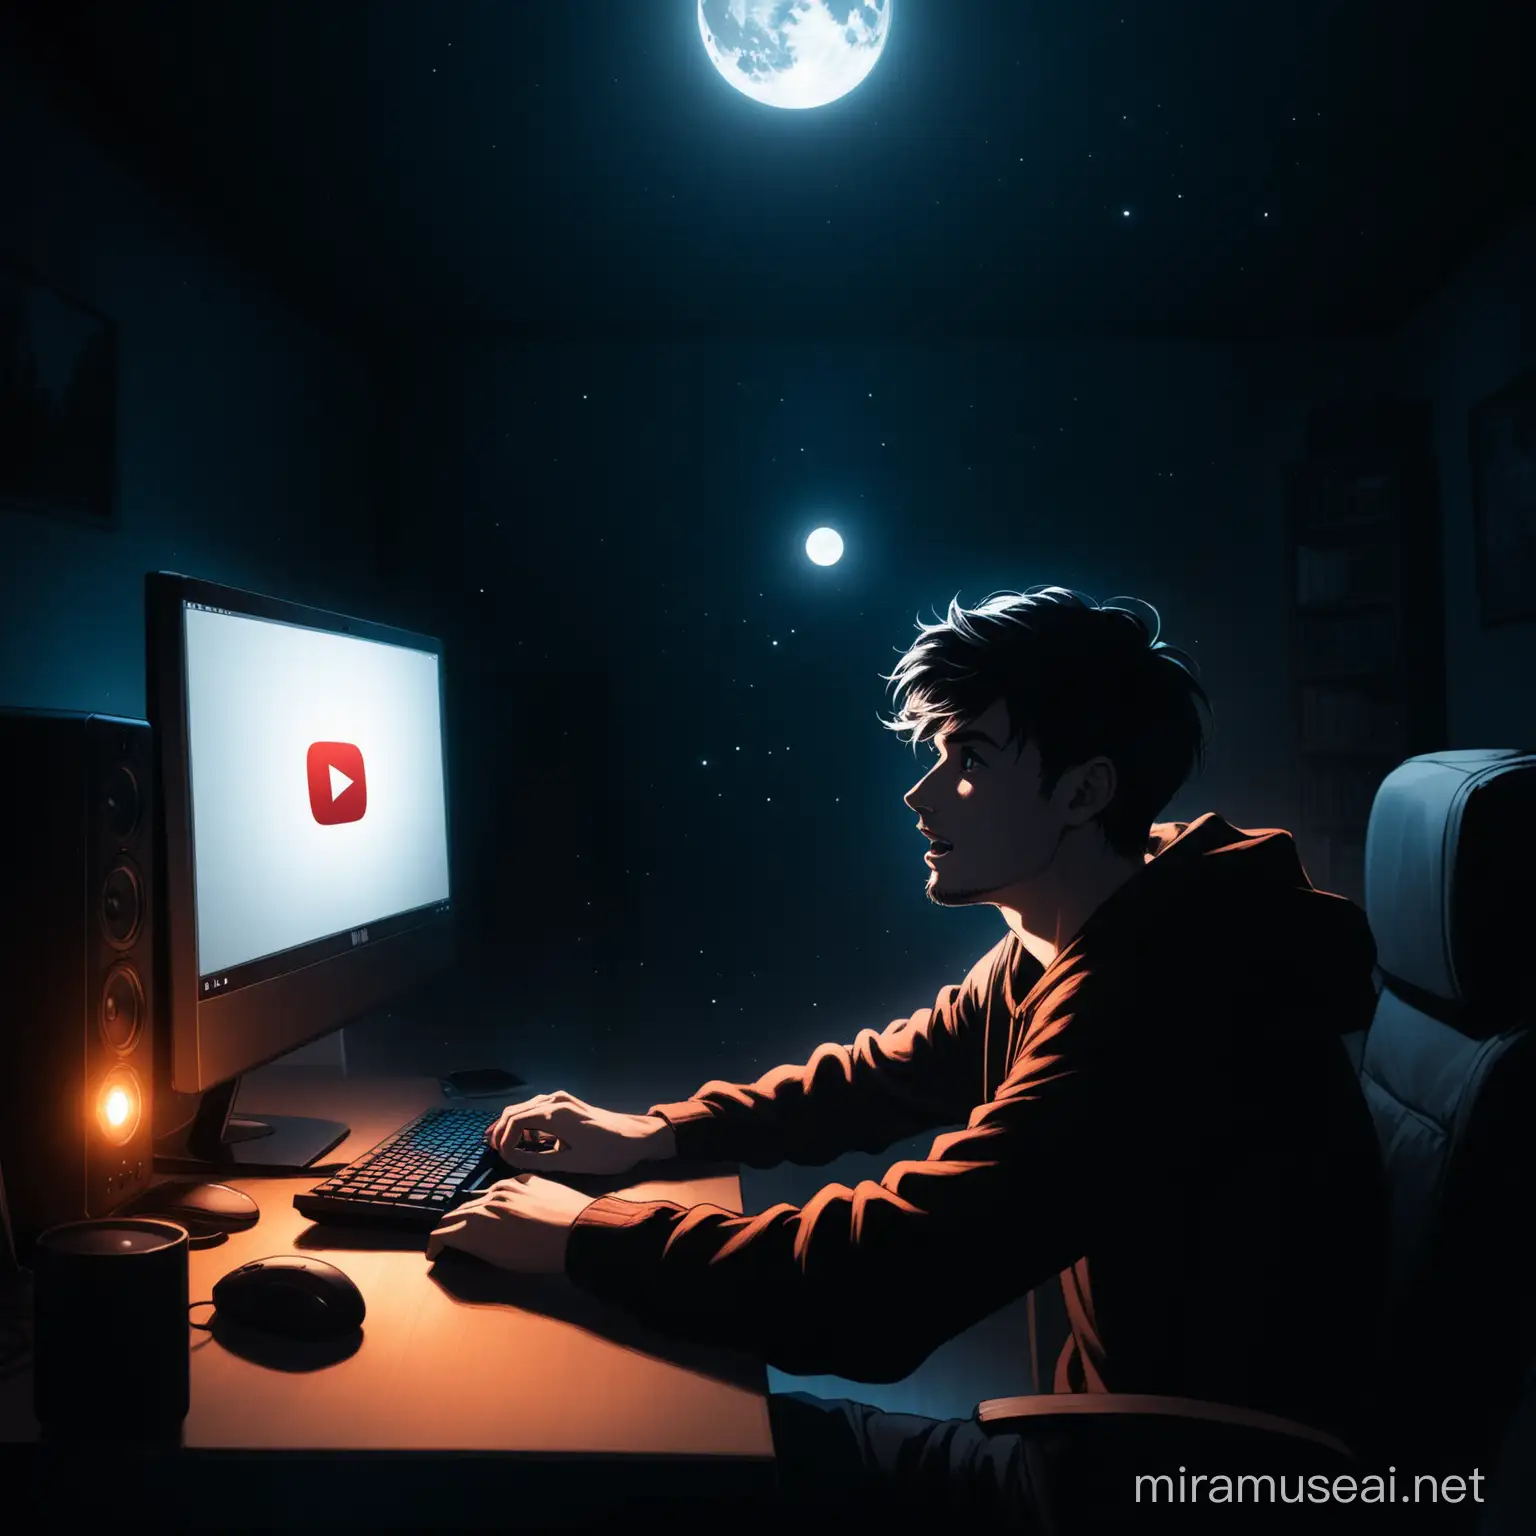 Mysterious YouTuber Celebrating Channel in Moonlit Room